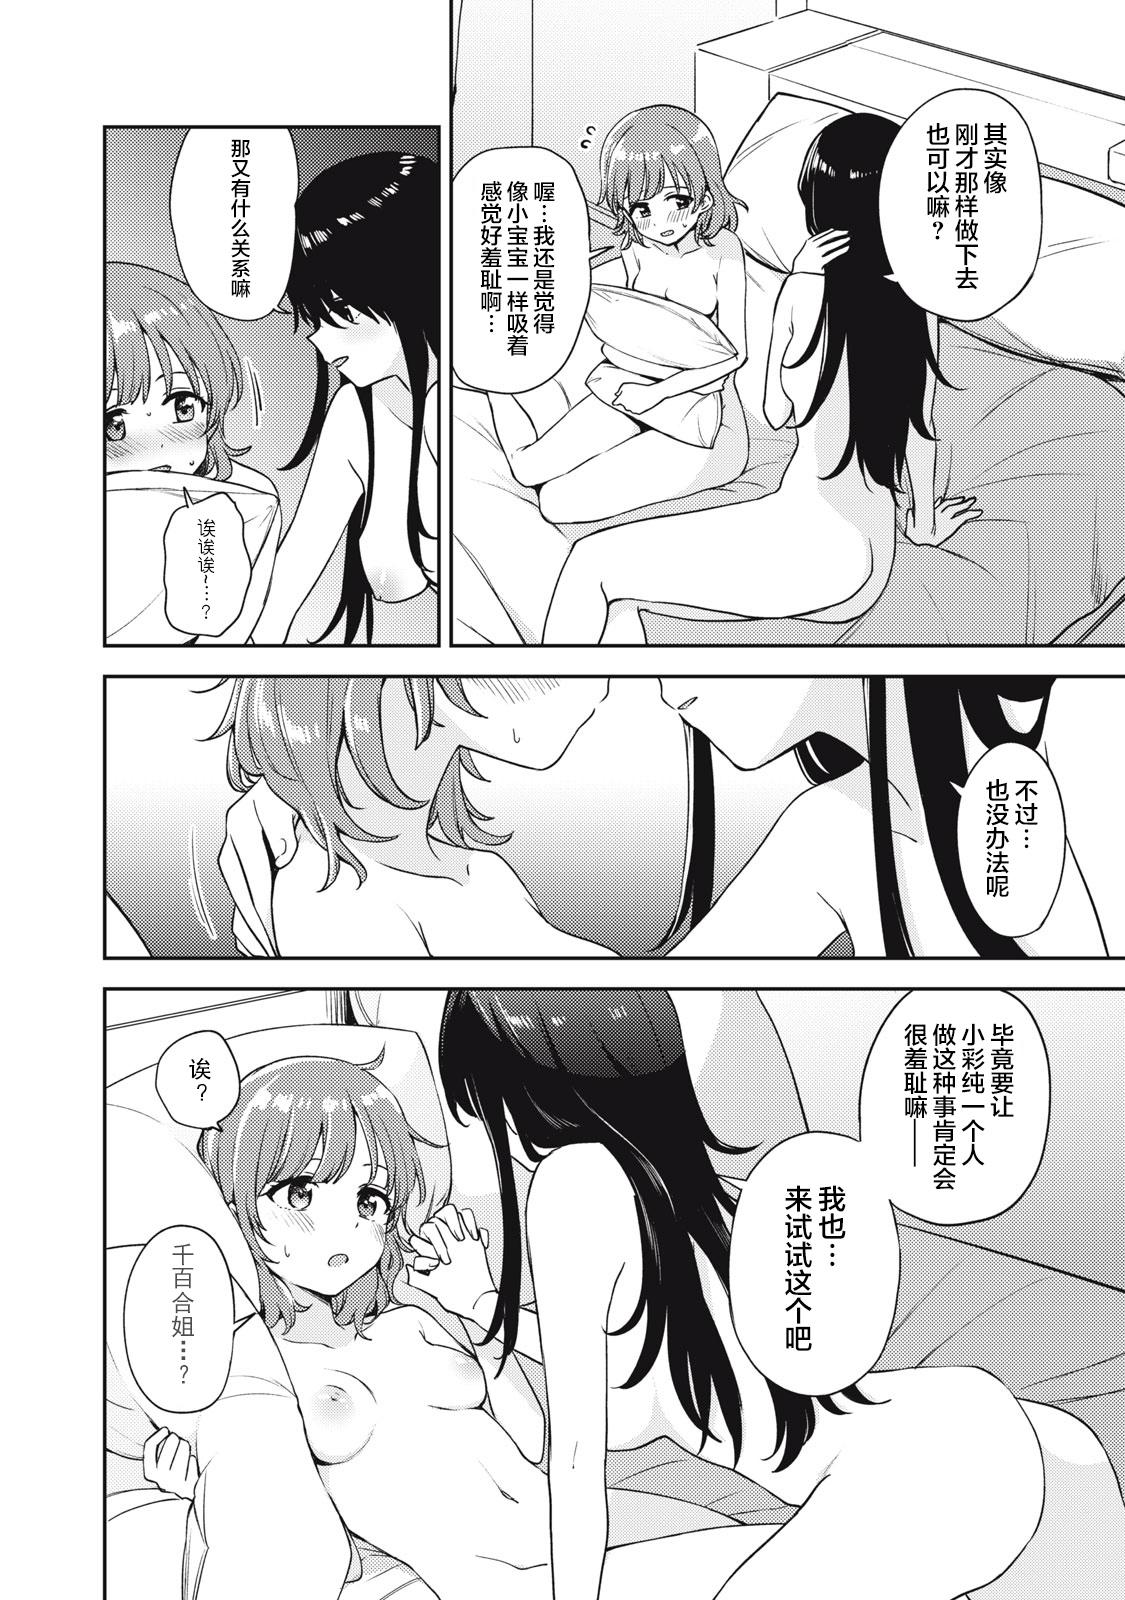 Bunduda Asumi-chan Is Interested In Lesbian Brothels! Extra Episode High Heels - Page 8